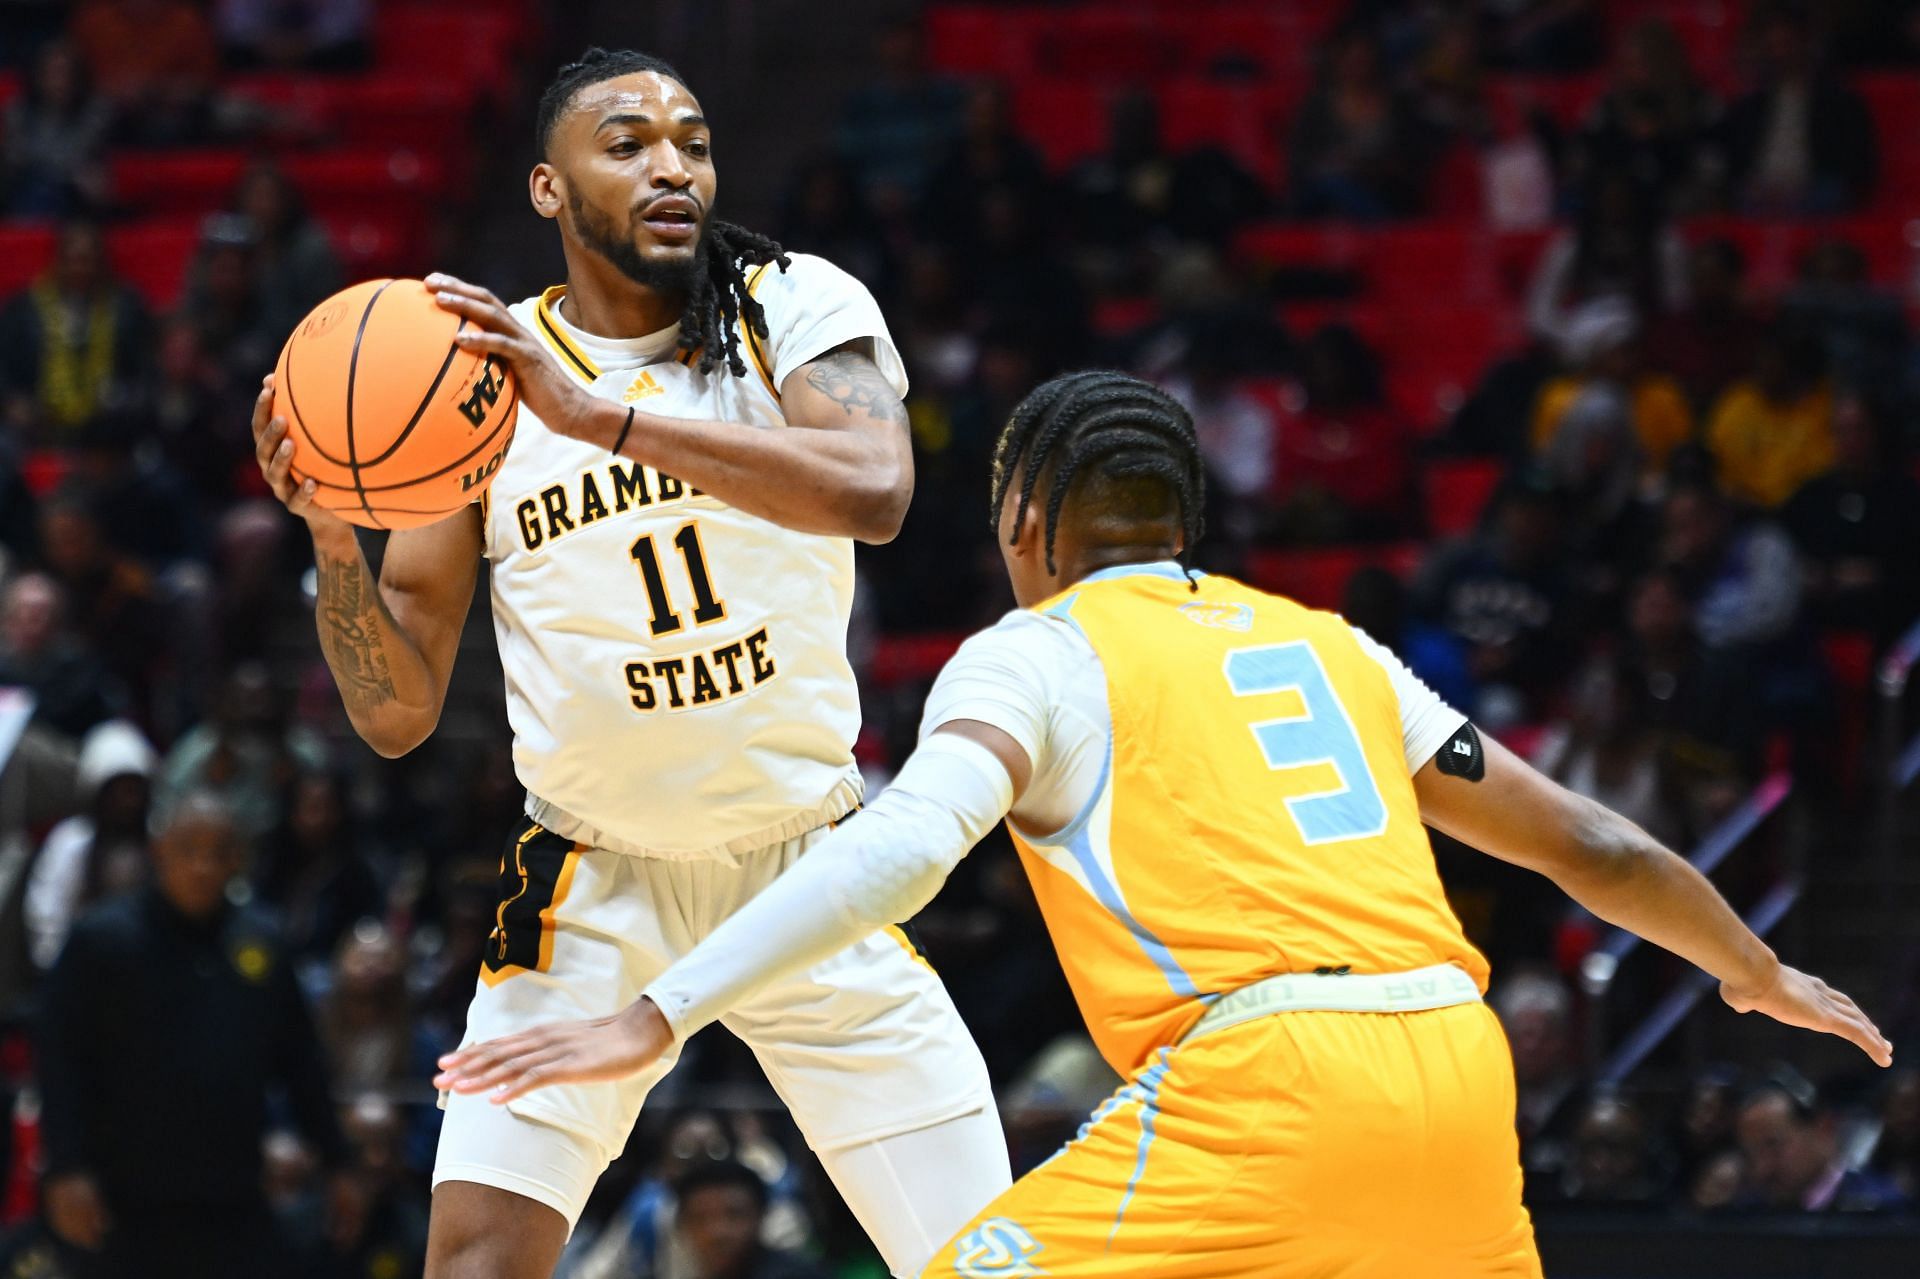 Jourdan Smith and Grambling State are preparing for their first NCAA Tournament appearance.